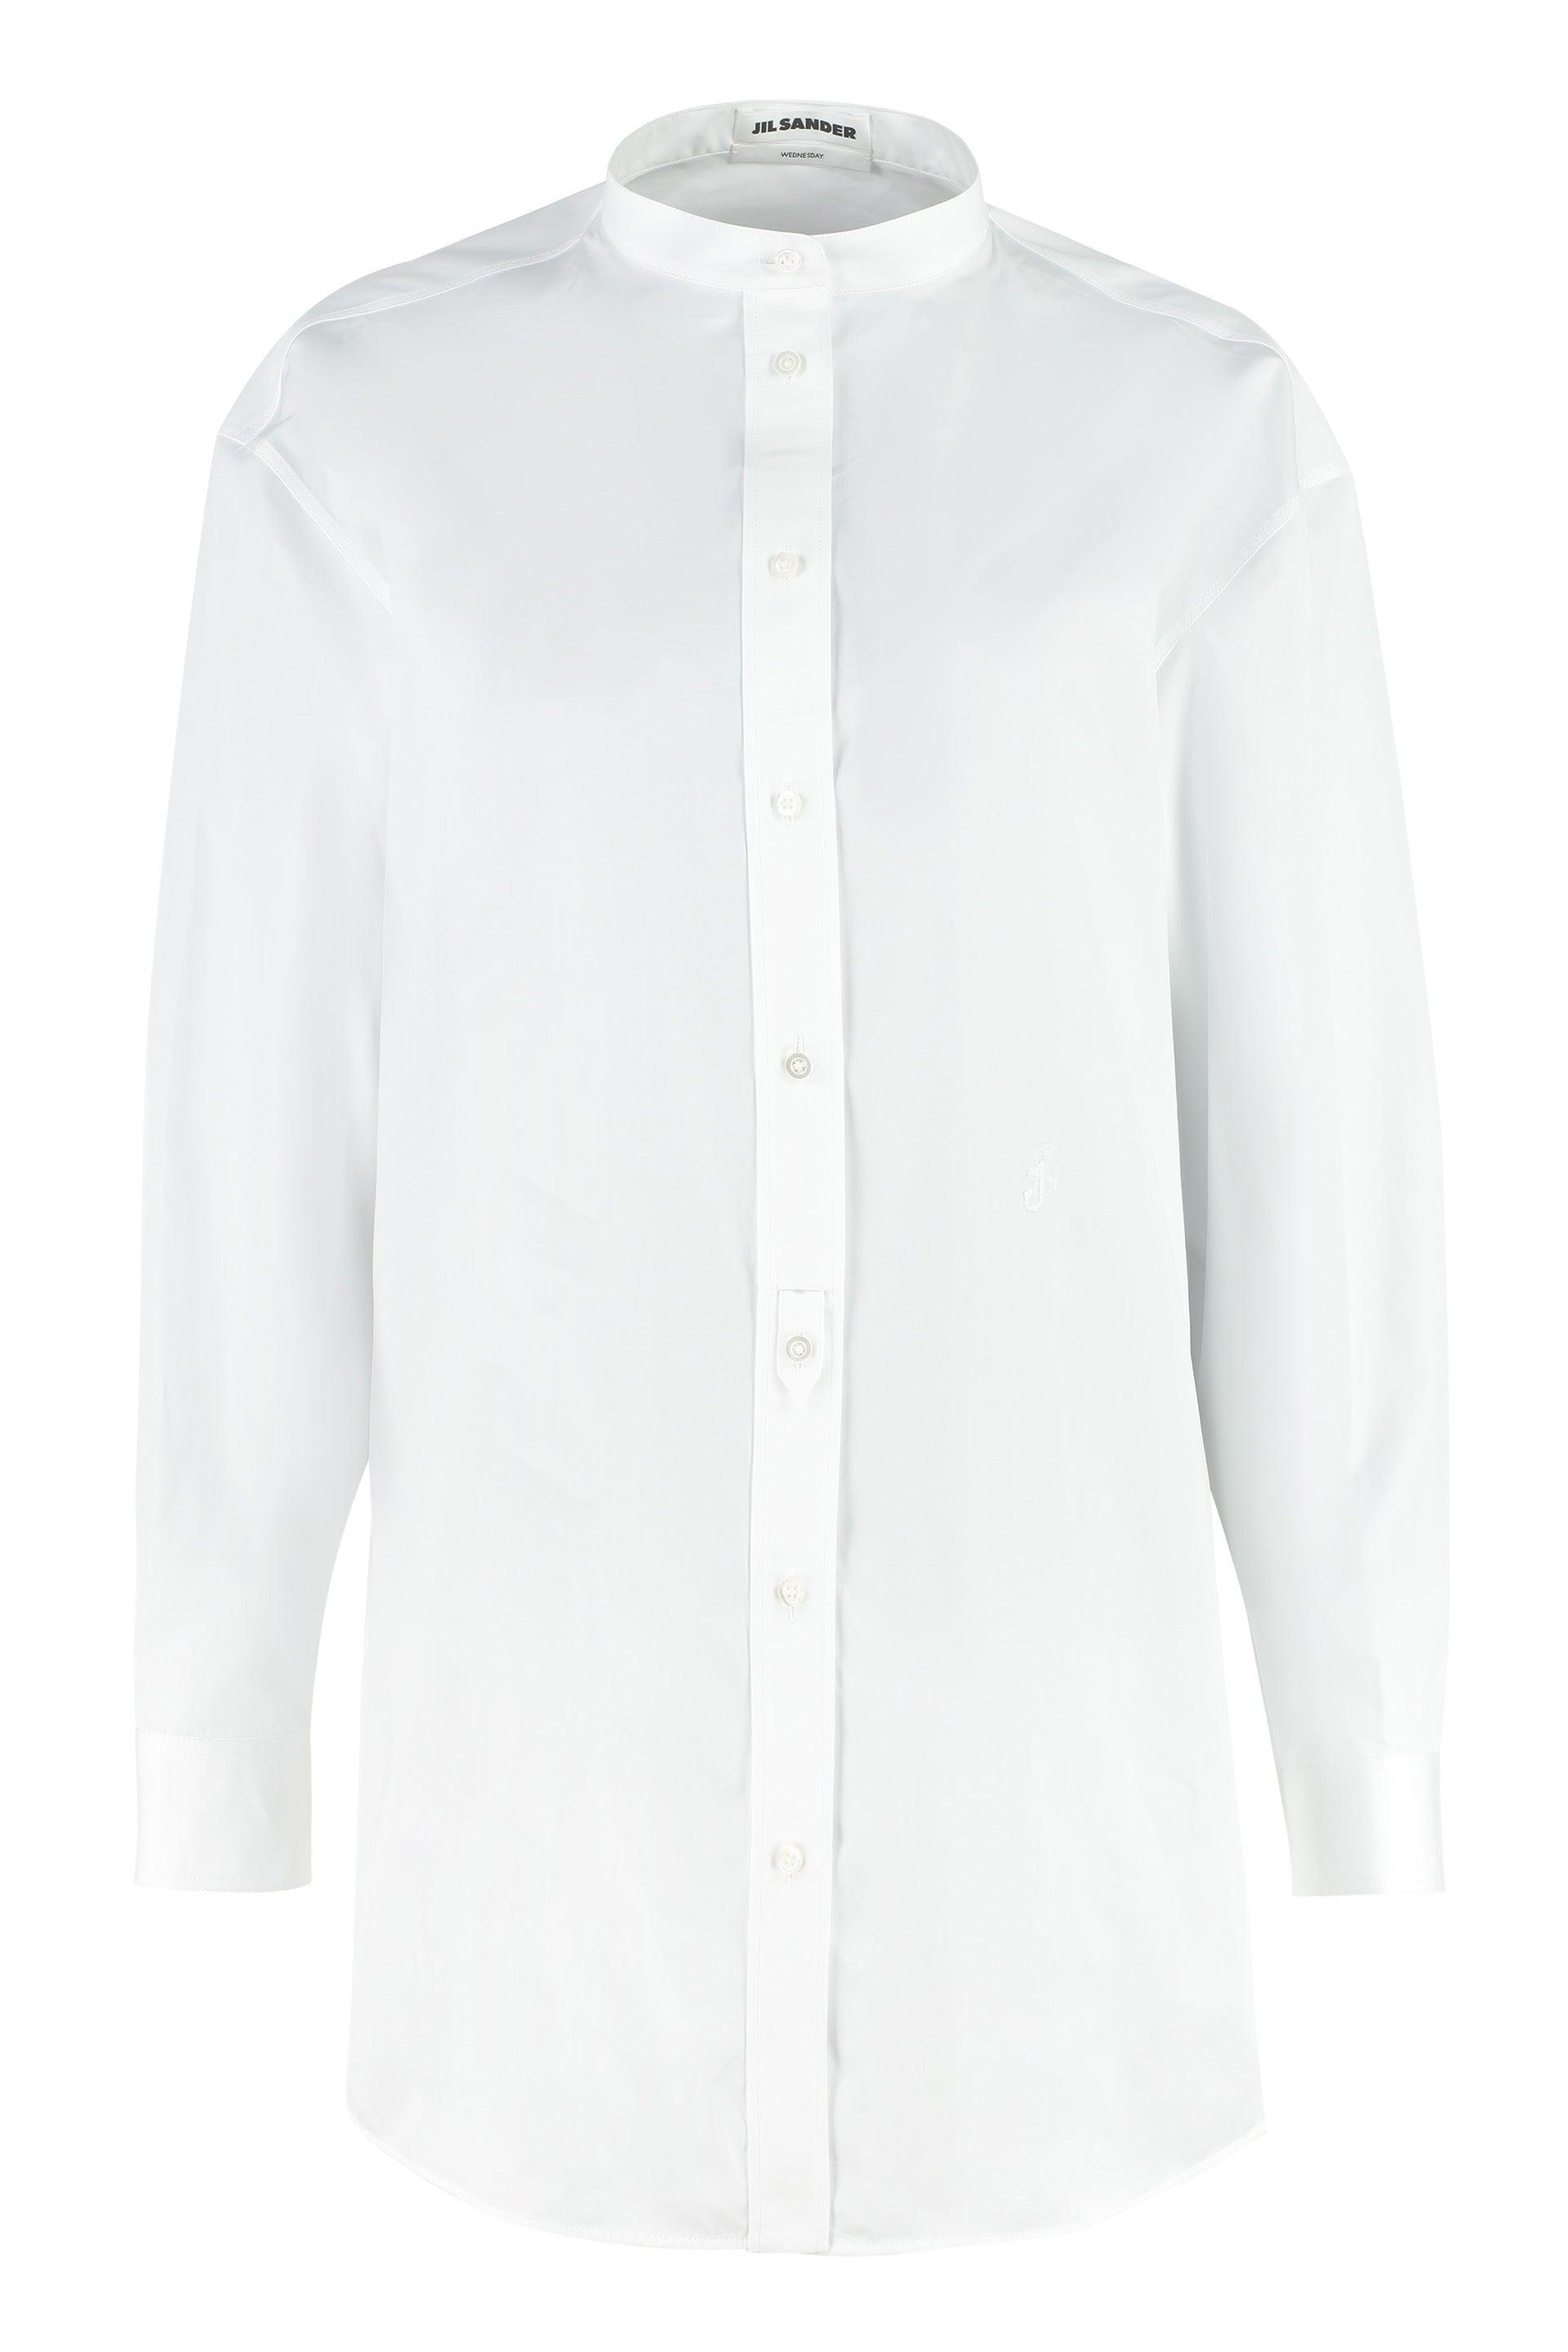 Jil Sander Cotton Stand-up Collar Shirt in White | Lyst